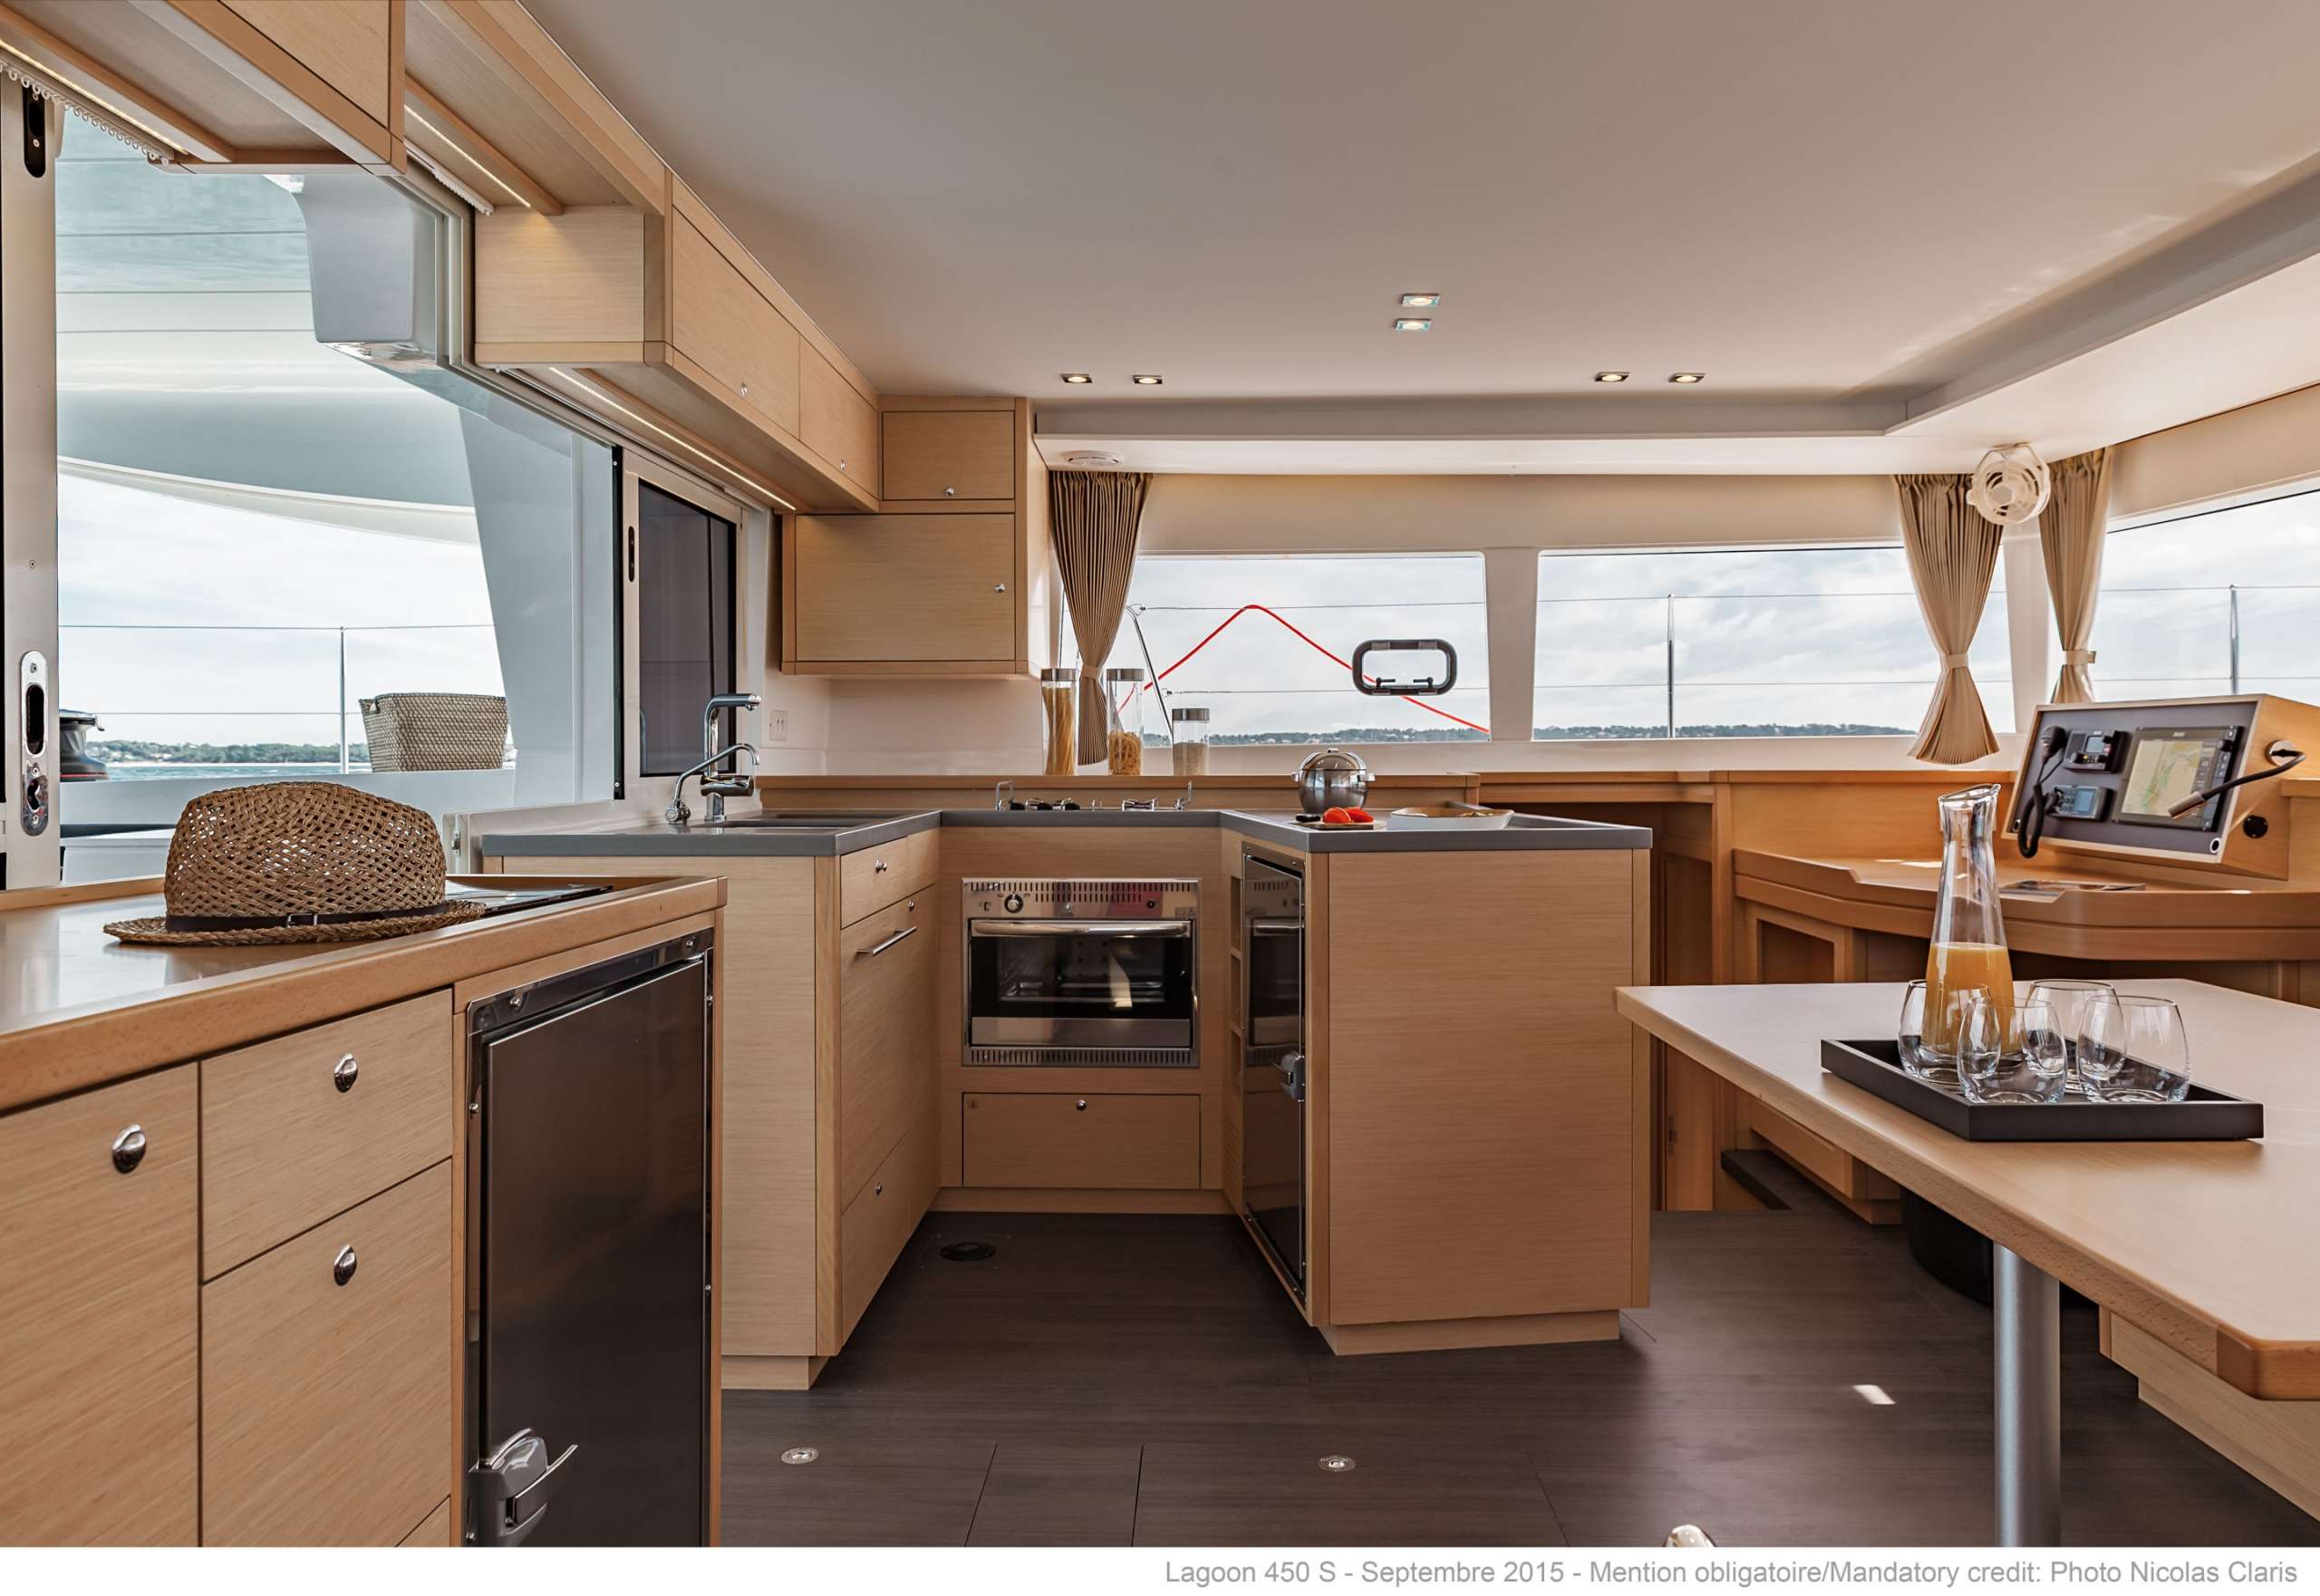 Lagoon 450F with the marvelous interior